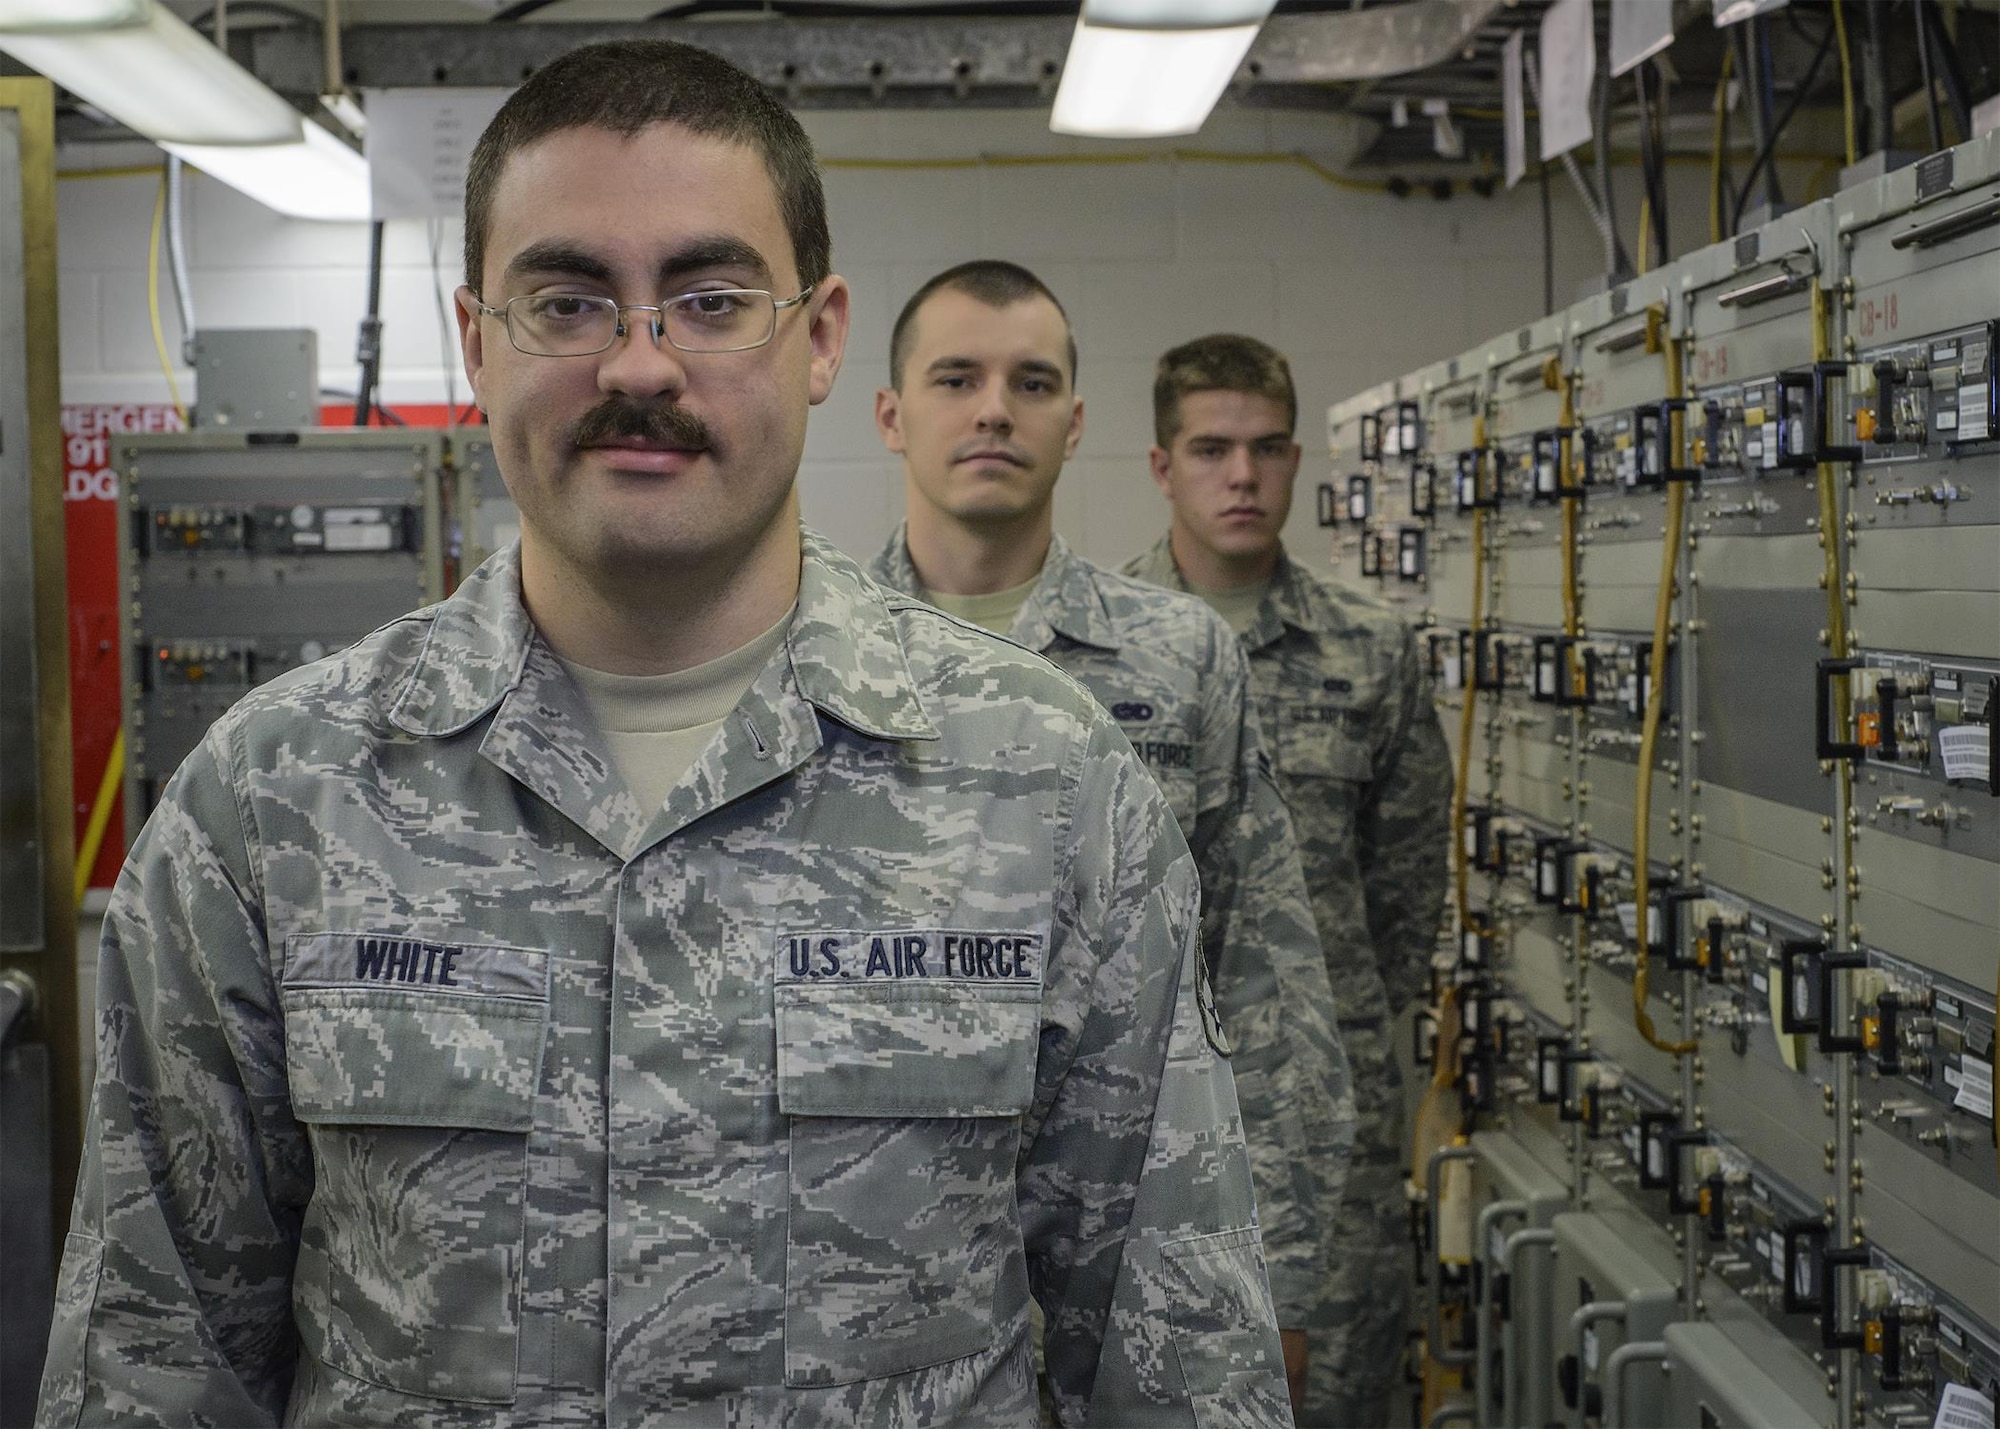 Senior Airman Thomas White, a 71st Operations Support Squadron Airman, and some of his wingmen at the Airfield Systems Maintenance shop at Vance Air Force Base, Oklahoma, June 25. (U.S. Air Force photo by David Poe)